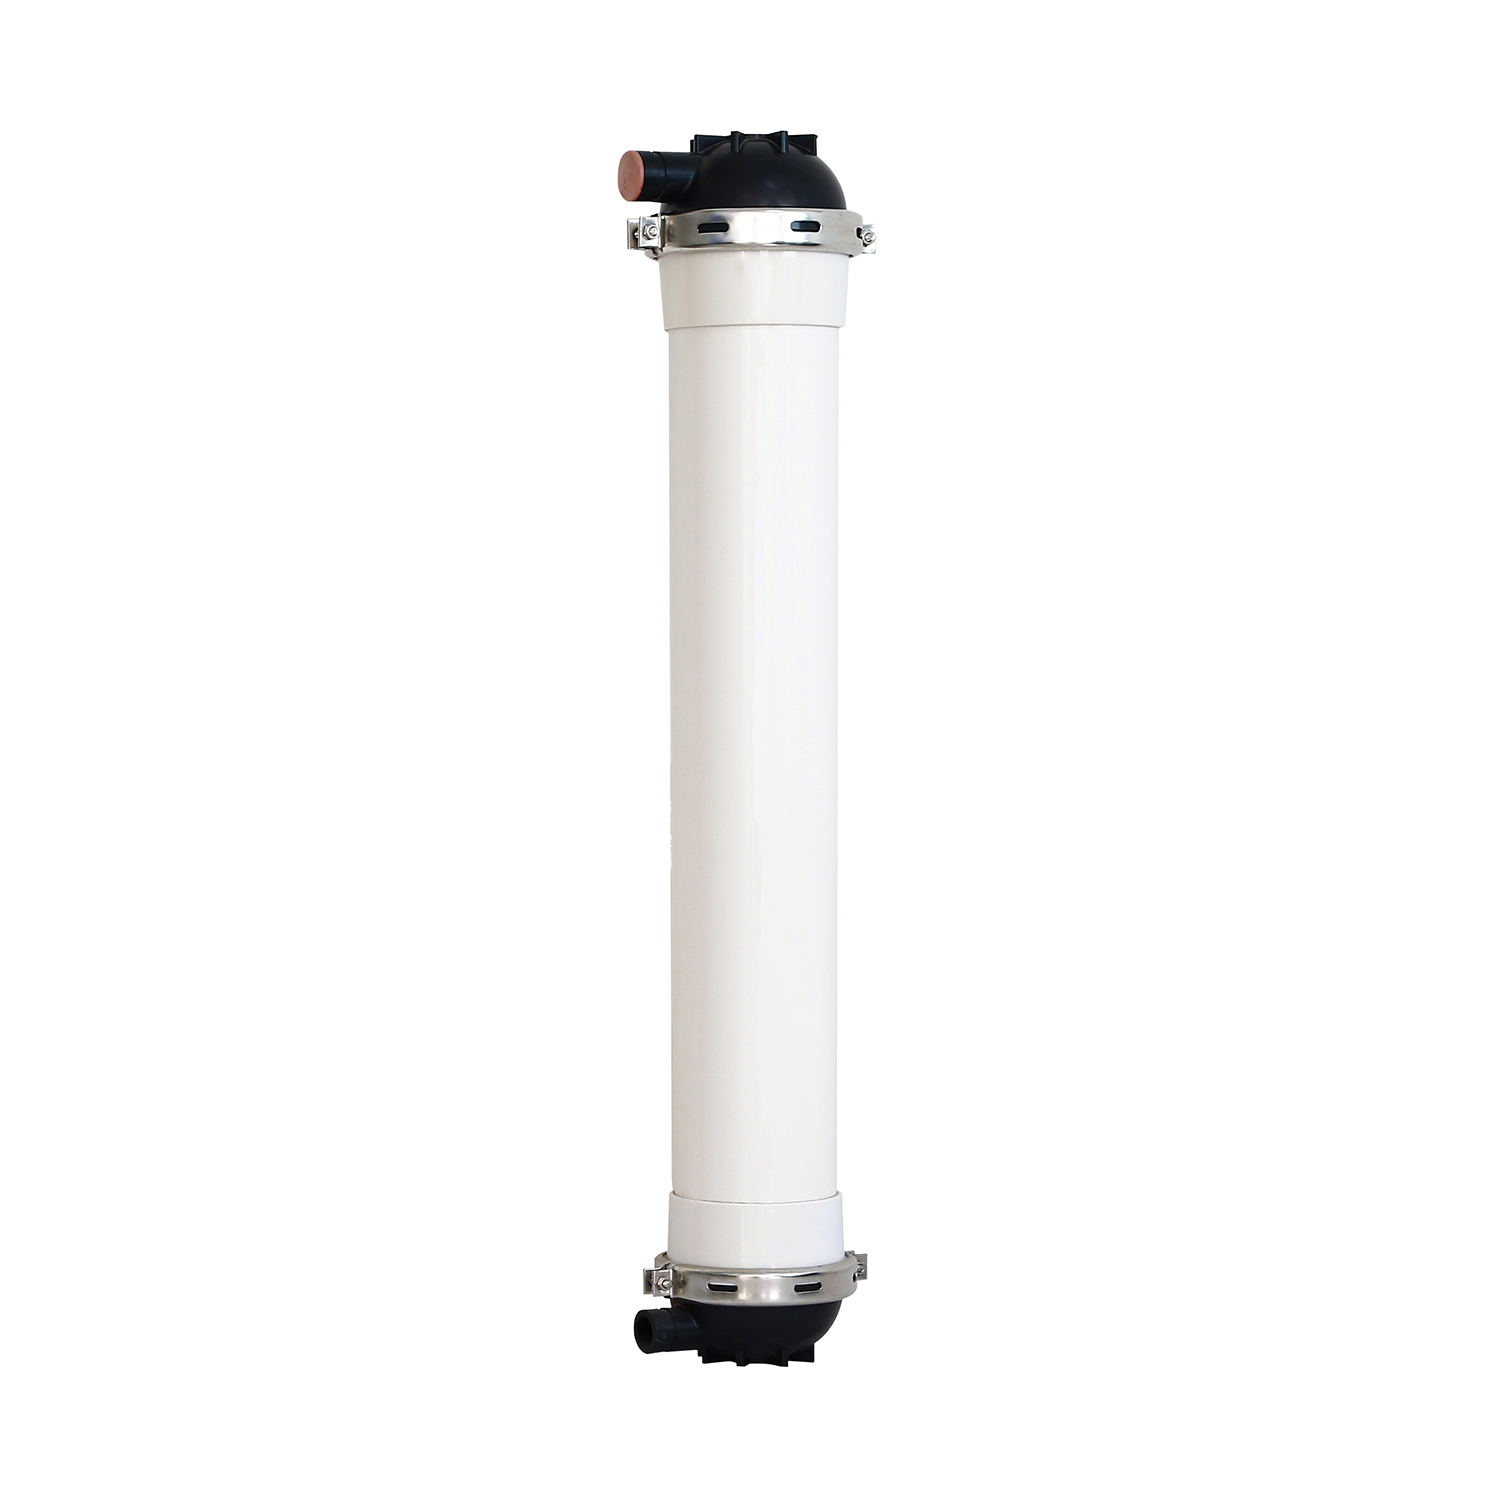 Hollow Fiber Ultrafiltration Membrane 8060 PVDF UF Membrane for Wastewater Purification 